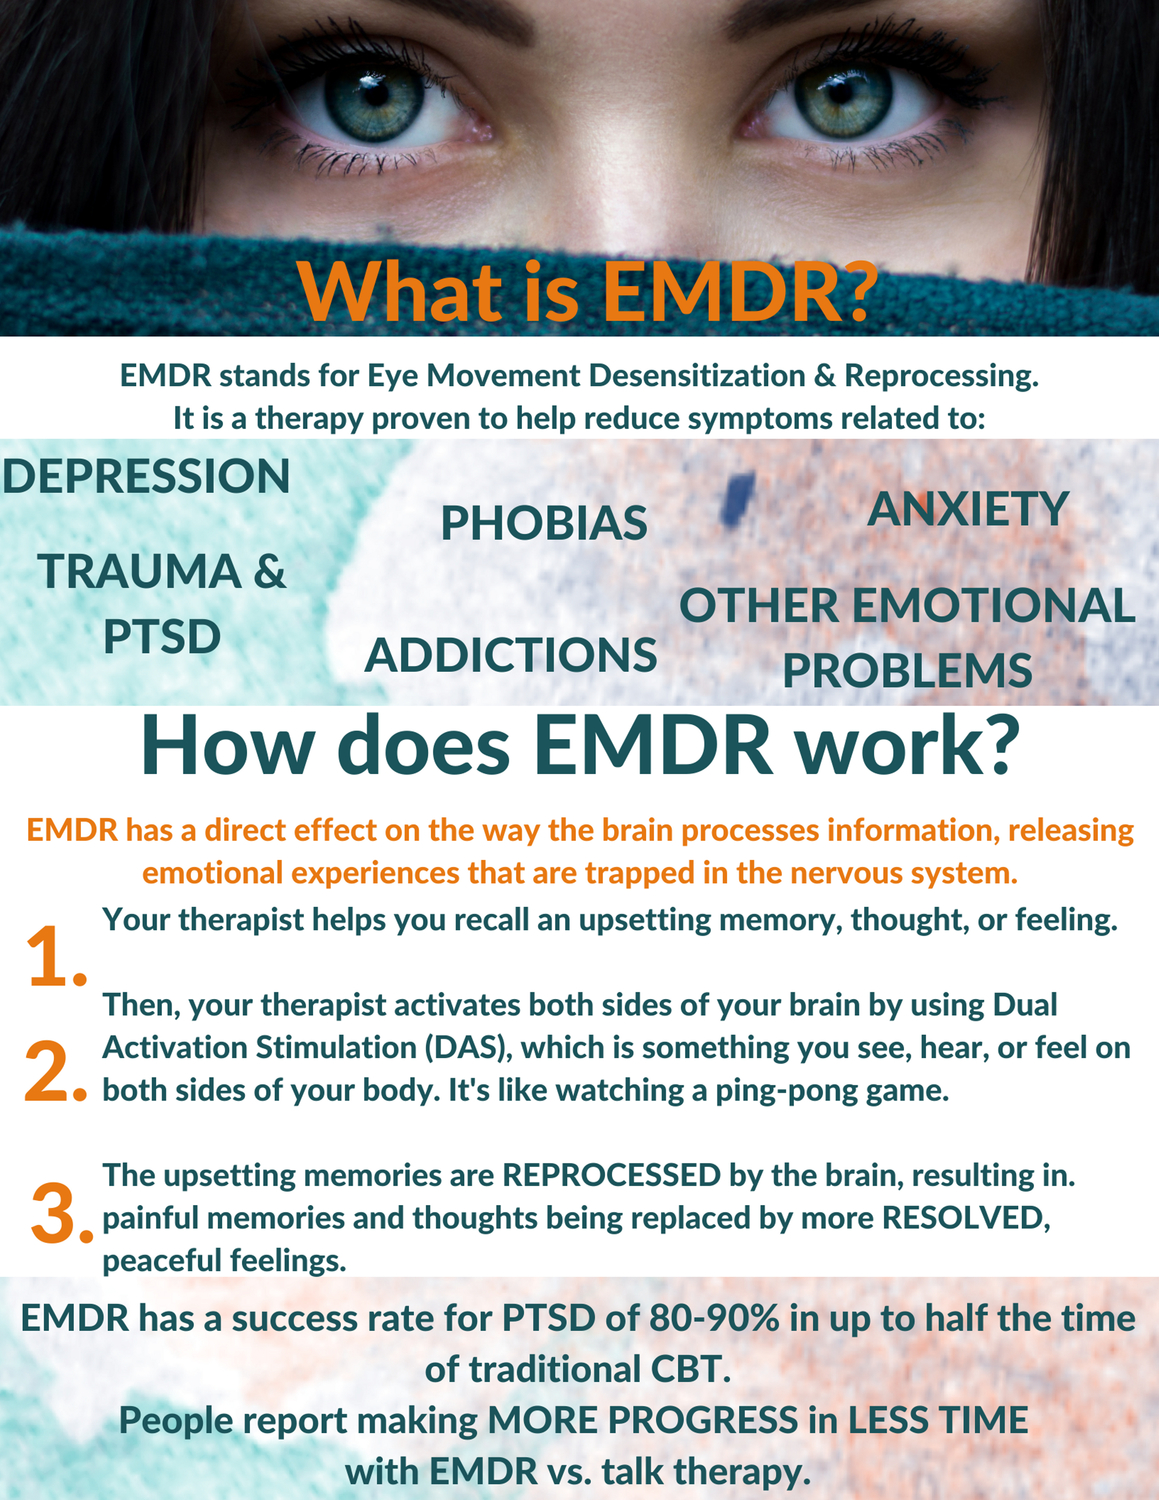 Gallery Photo of EMDR has been extensively researched & proven effective for the treatment of trauma. People report making MORE PROGRESS in LESS TIME.